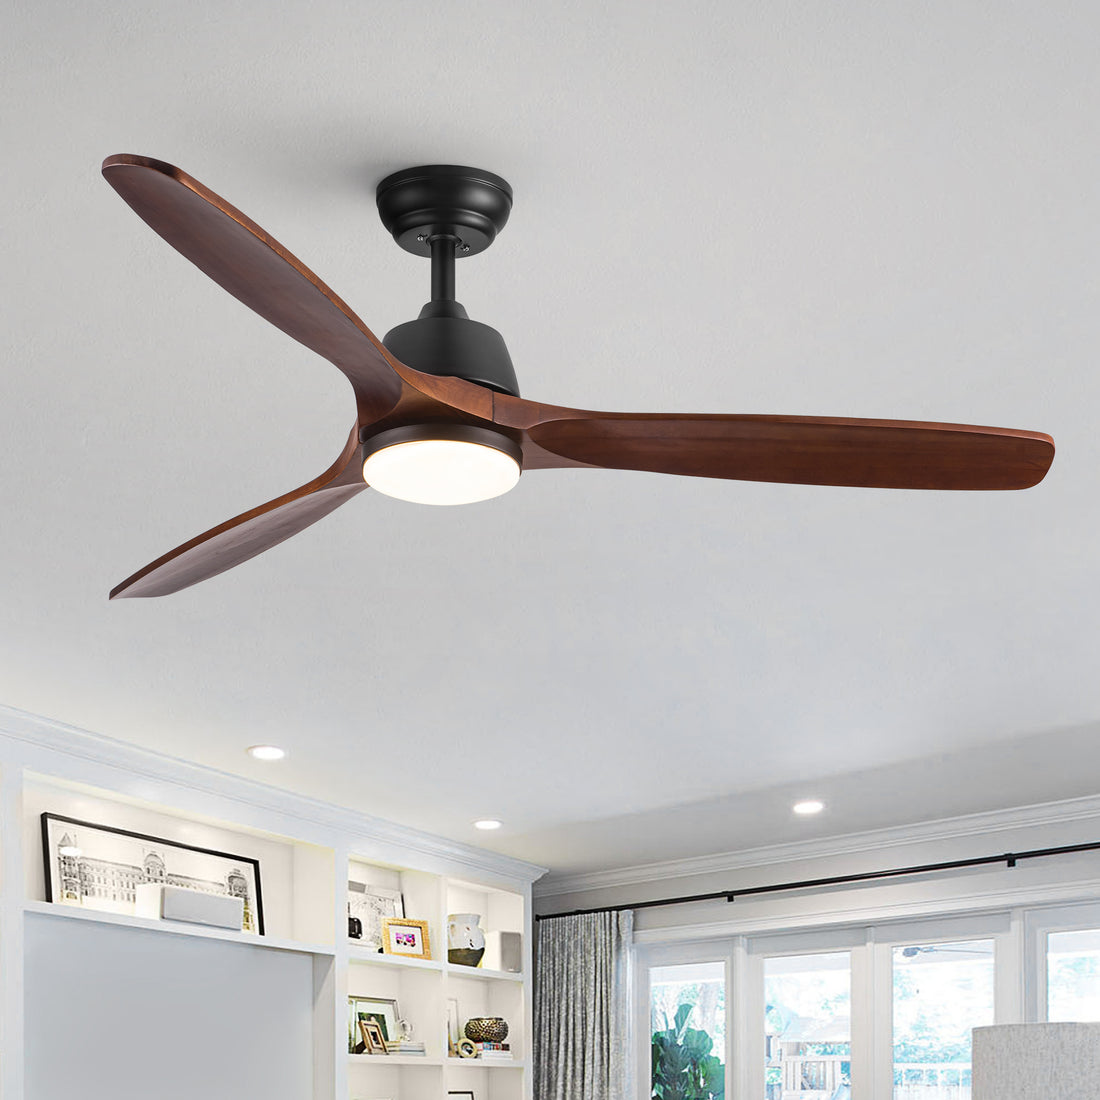 52 In.Intergrated LED Ceiling Fan Lighting with Solid brown-abs